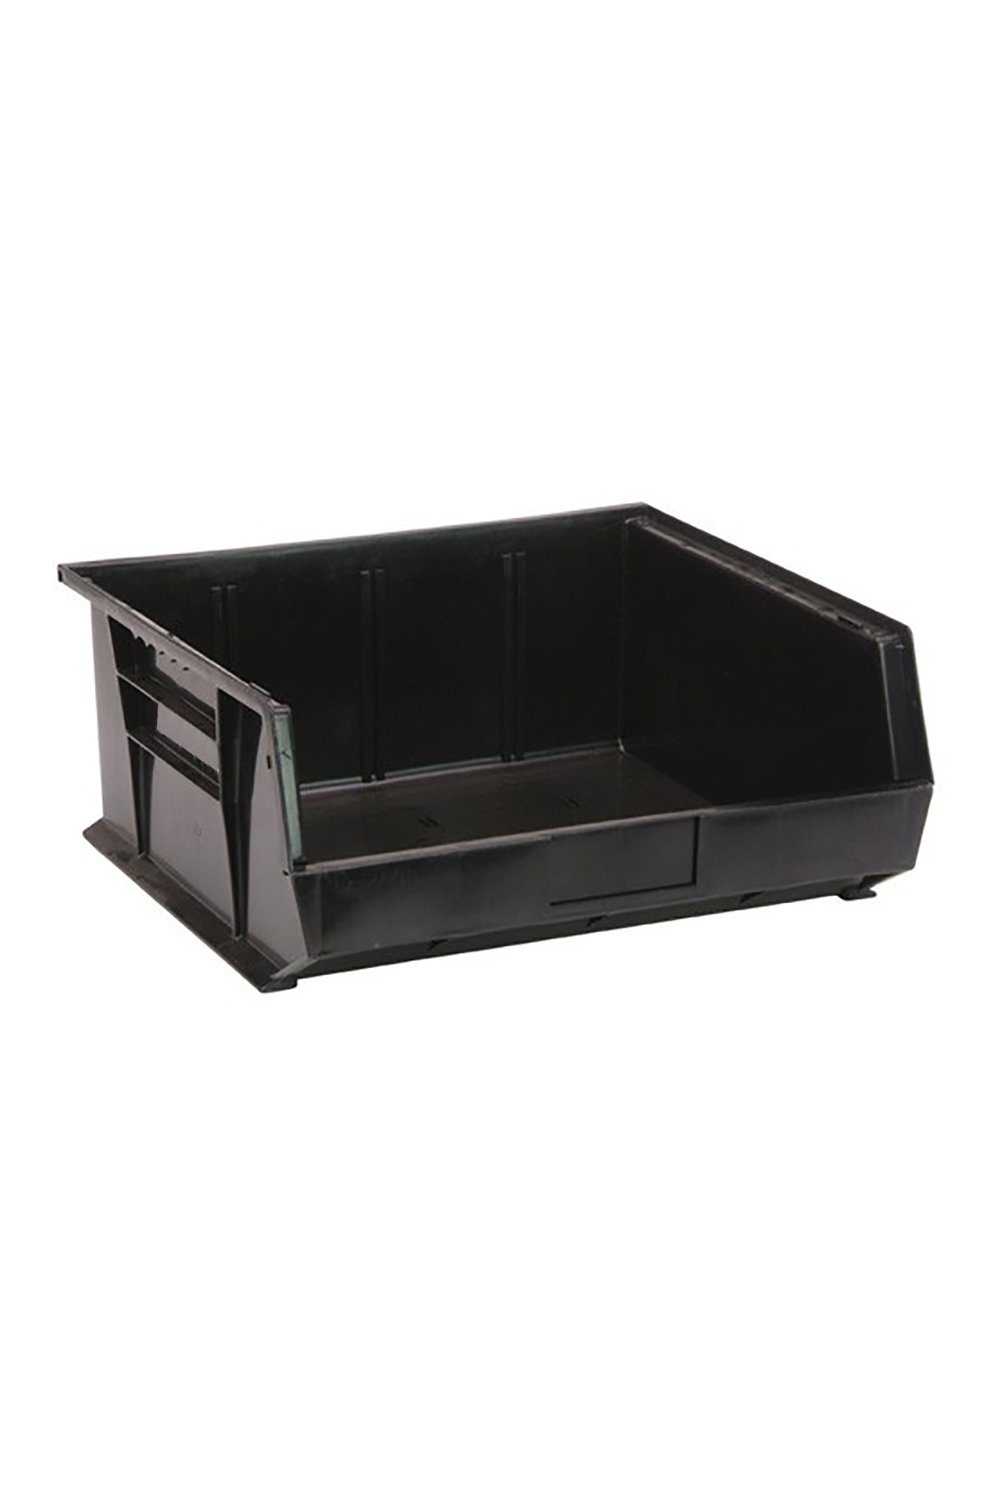 Recycled Ultra Hang and Stack Bin Bins & Containers Acart 14-3/4"L x 16-1/2"W x 7"H Black 